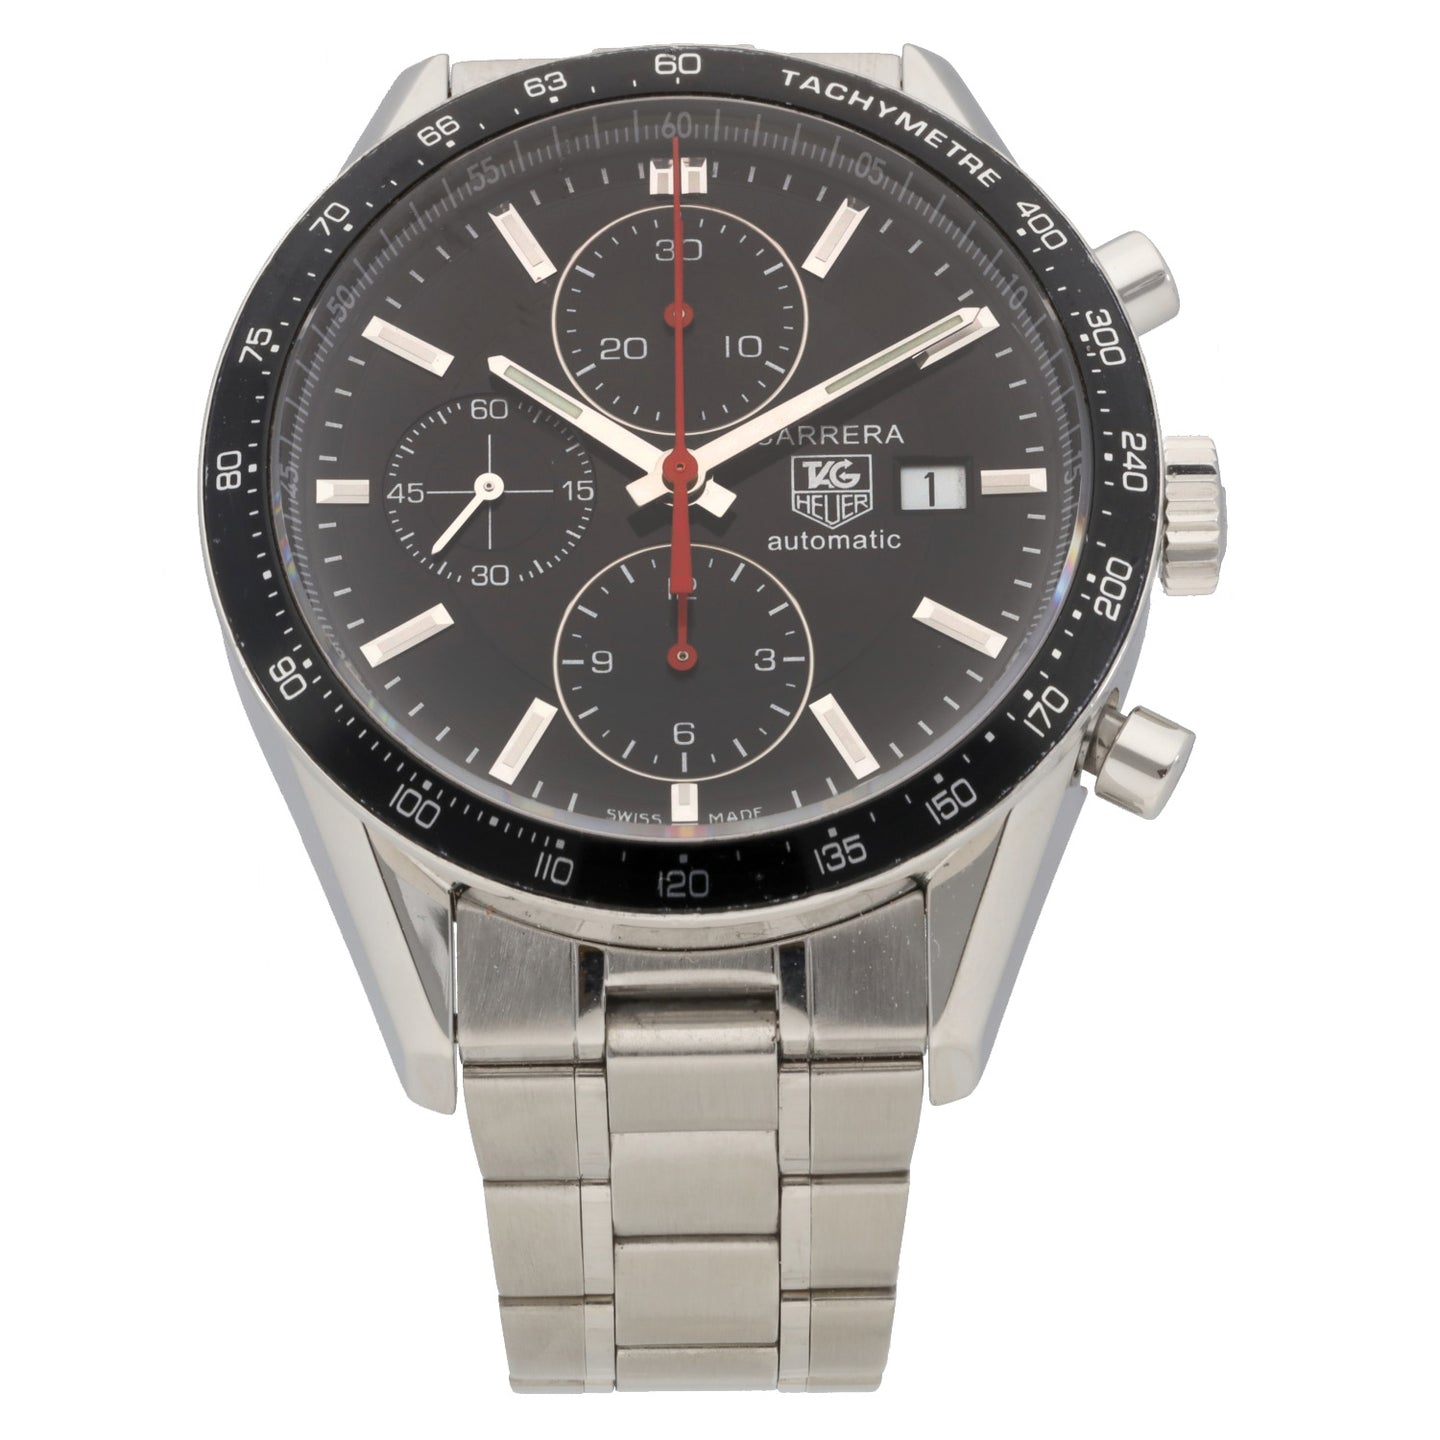 Tag Heuer Carrera CV2014-0 41mm Stainless Steel Watch